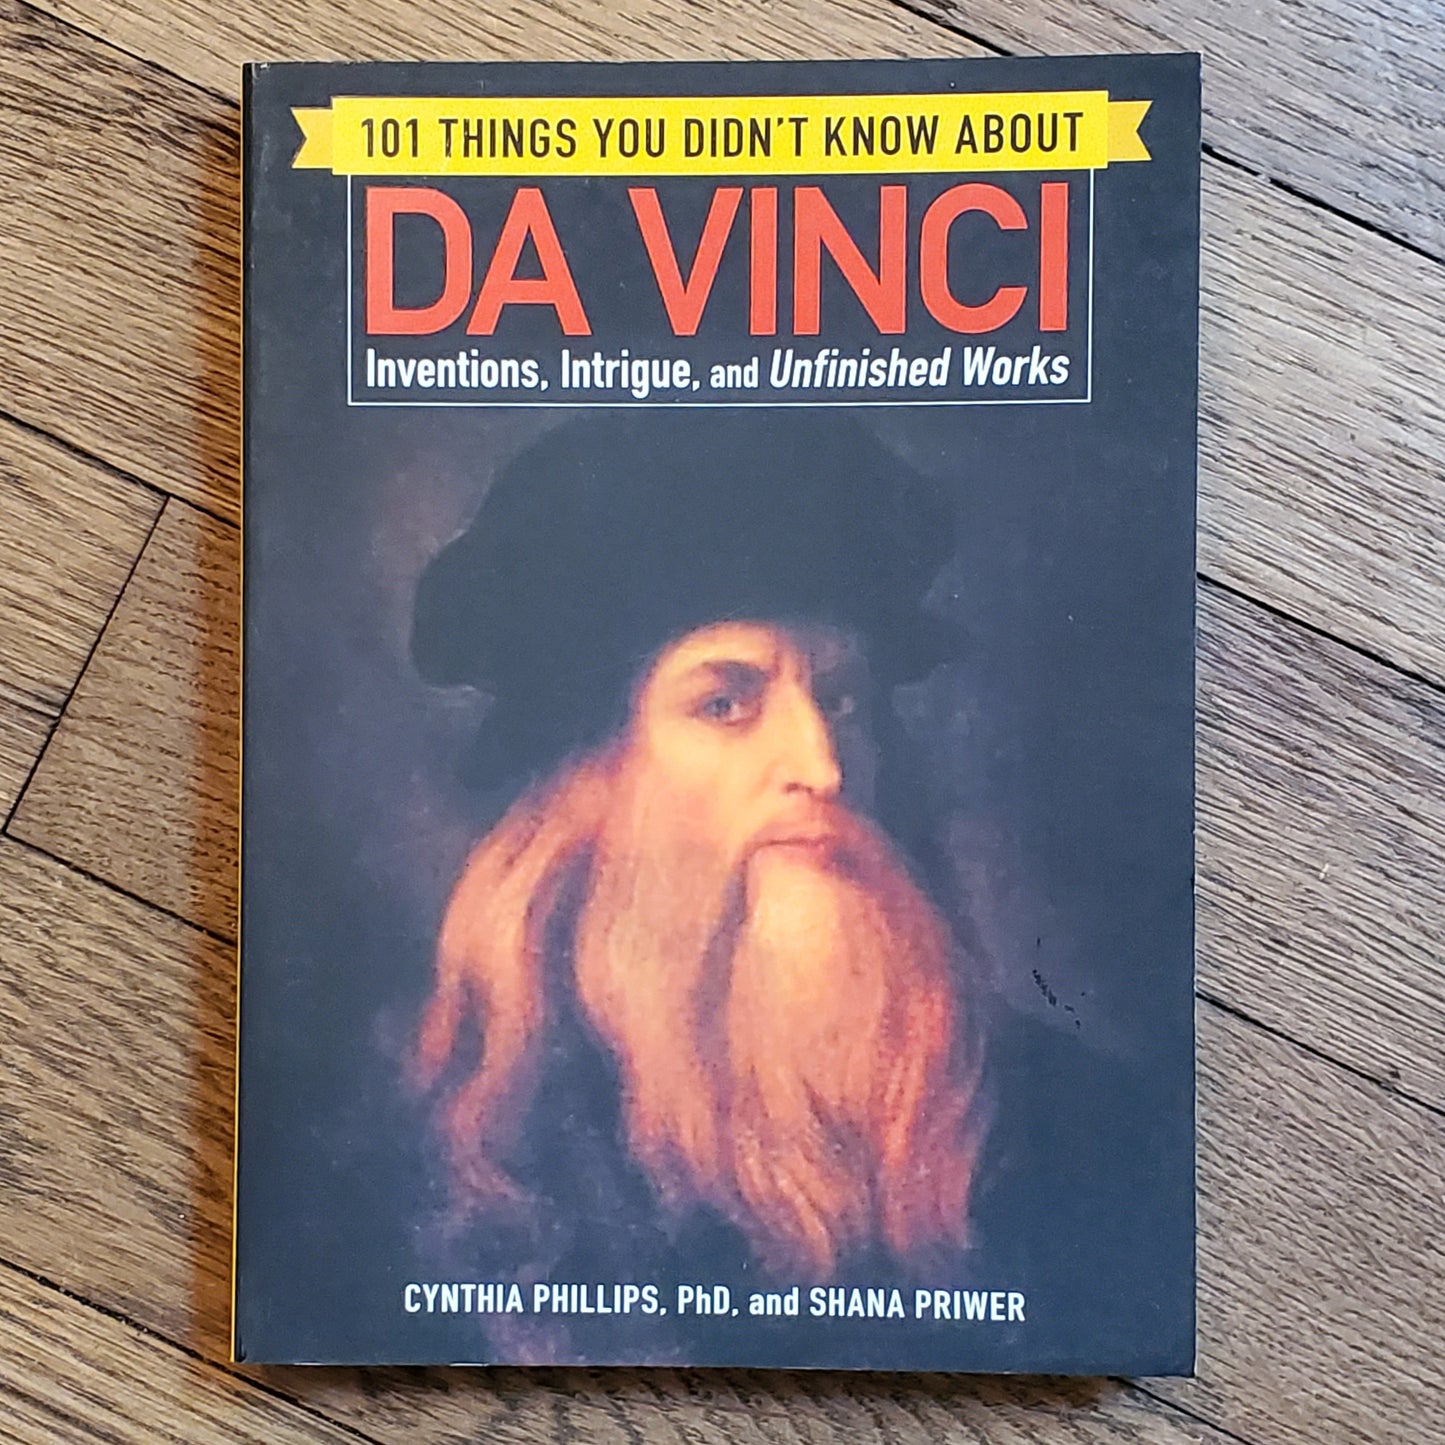 101 Things You Didn't Know About da Vinci